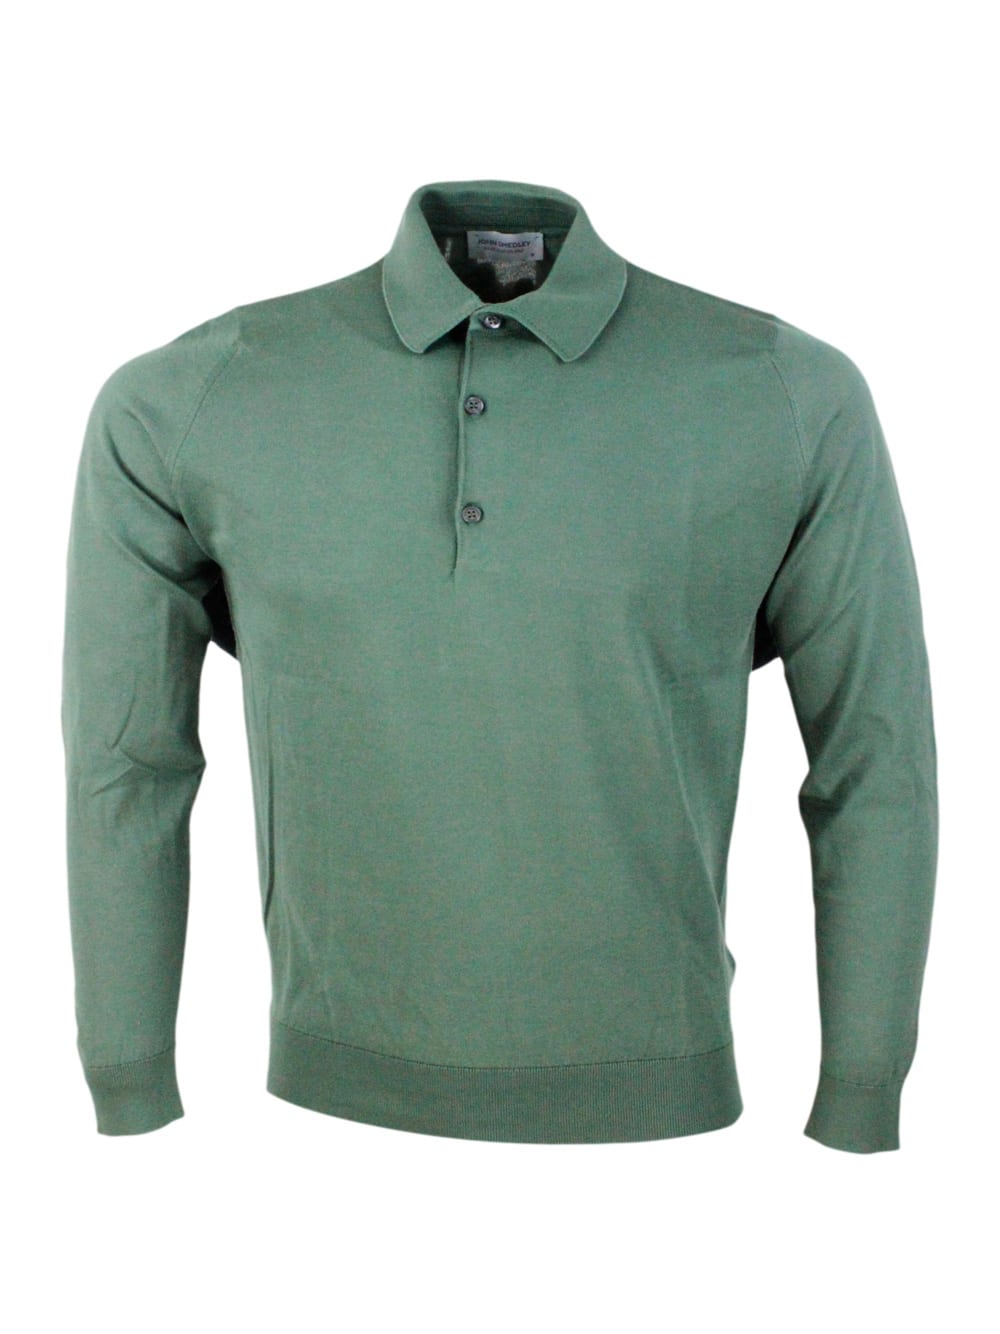 john smedley long-sleeved polo shirt in extrafine cotton thread with three buttons